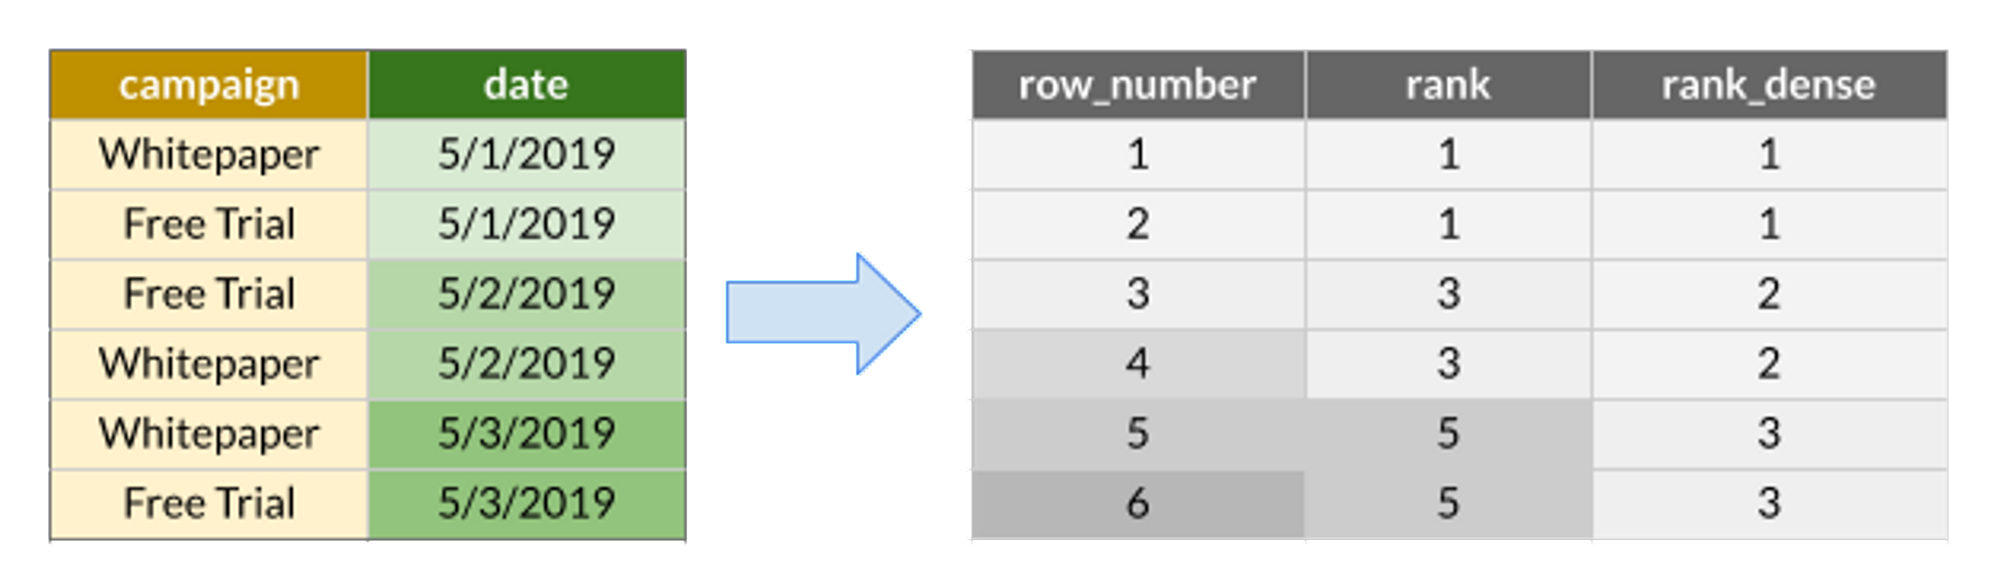 Diagram explaining the ROW_NUMBER, RANK and RANK_DENSE ranking window function